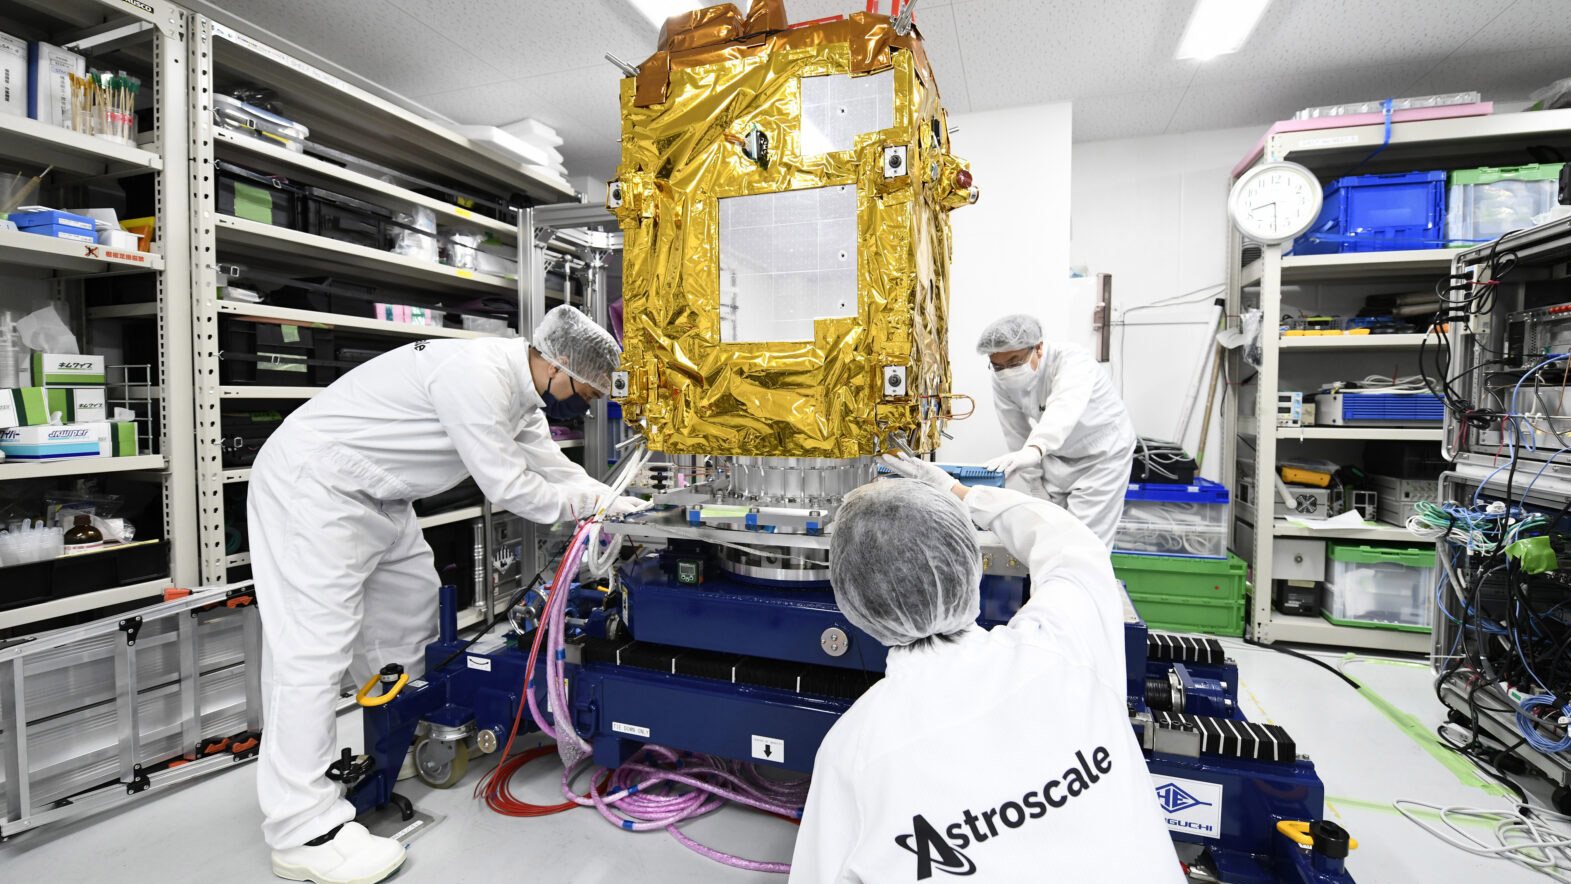 Astroscale workers in cleansuits prepare Adras-J for its mission